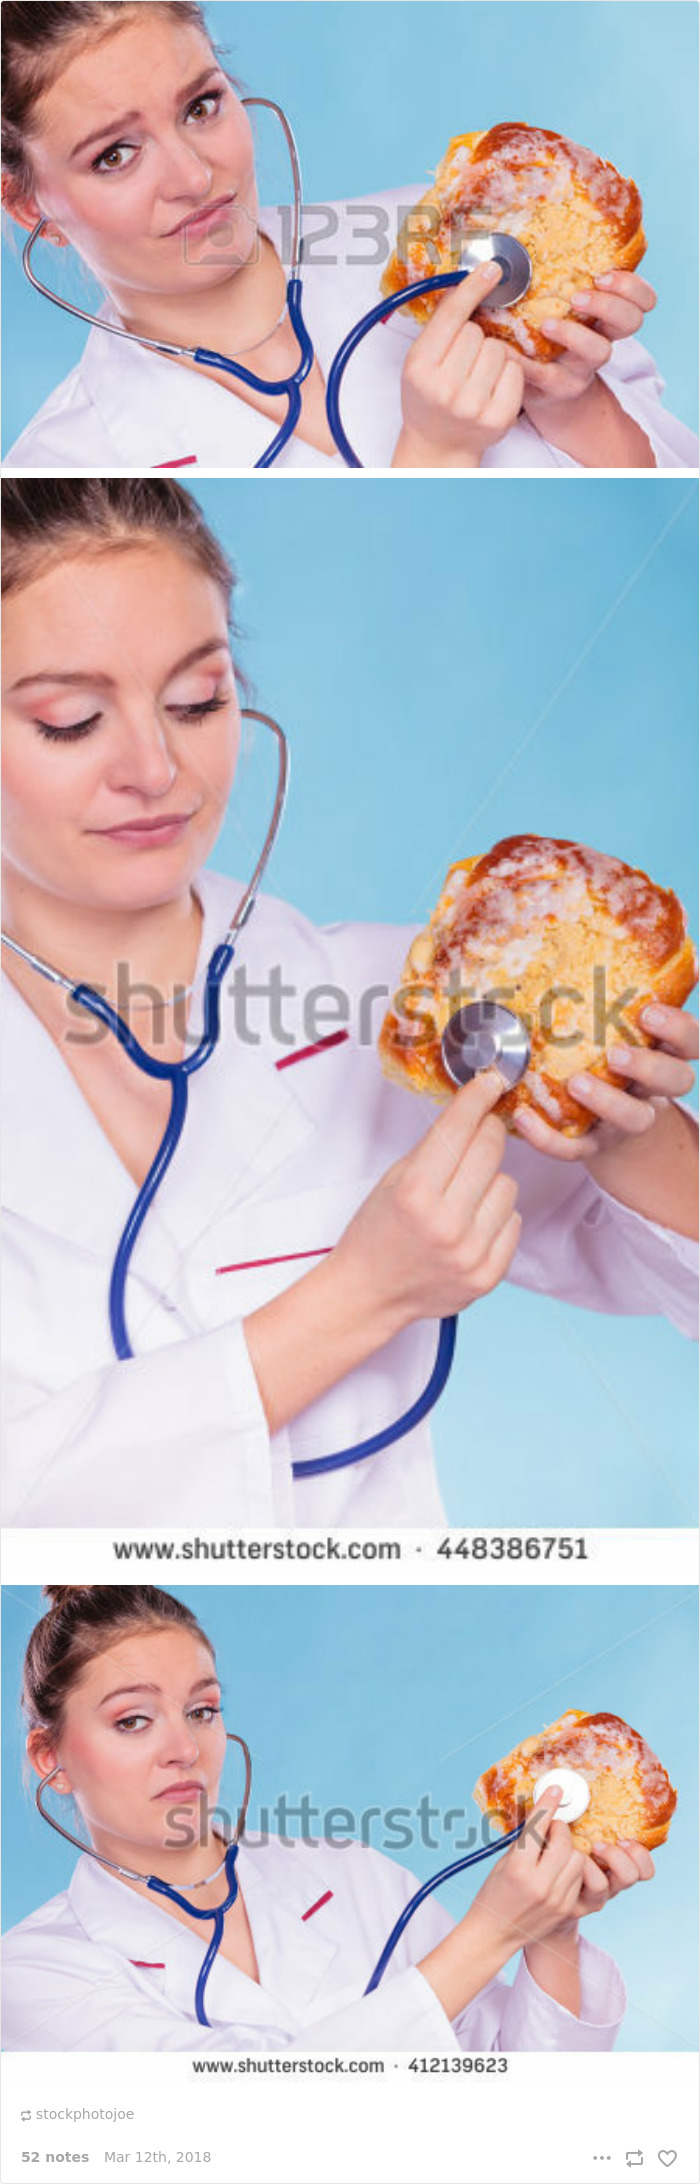 Disgusted Dietitian Nutritionist Checking Examine Sweet Roll Bun With Stethoscope. Because Why Not?